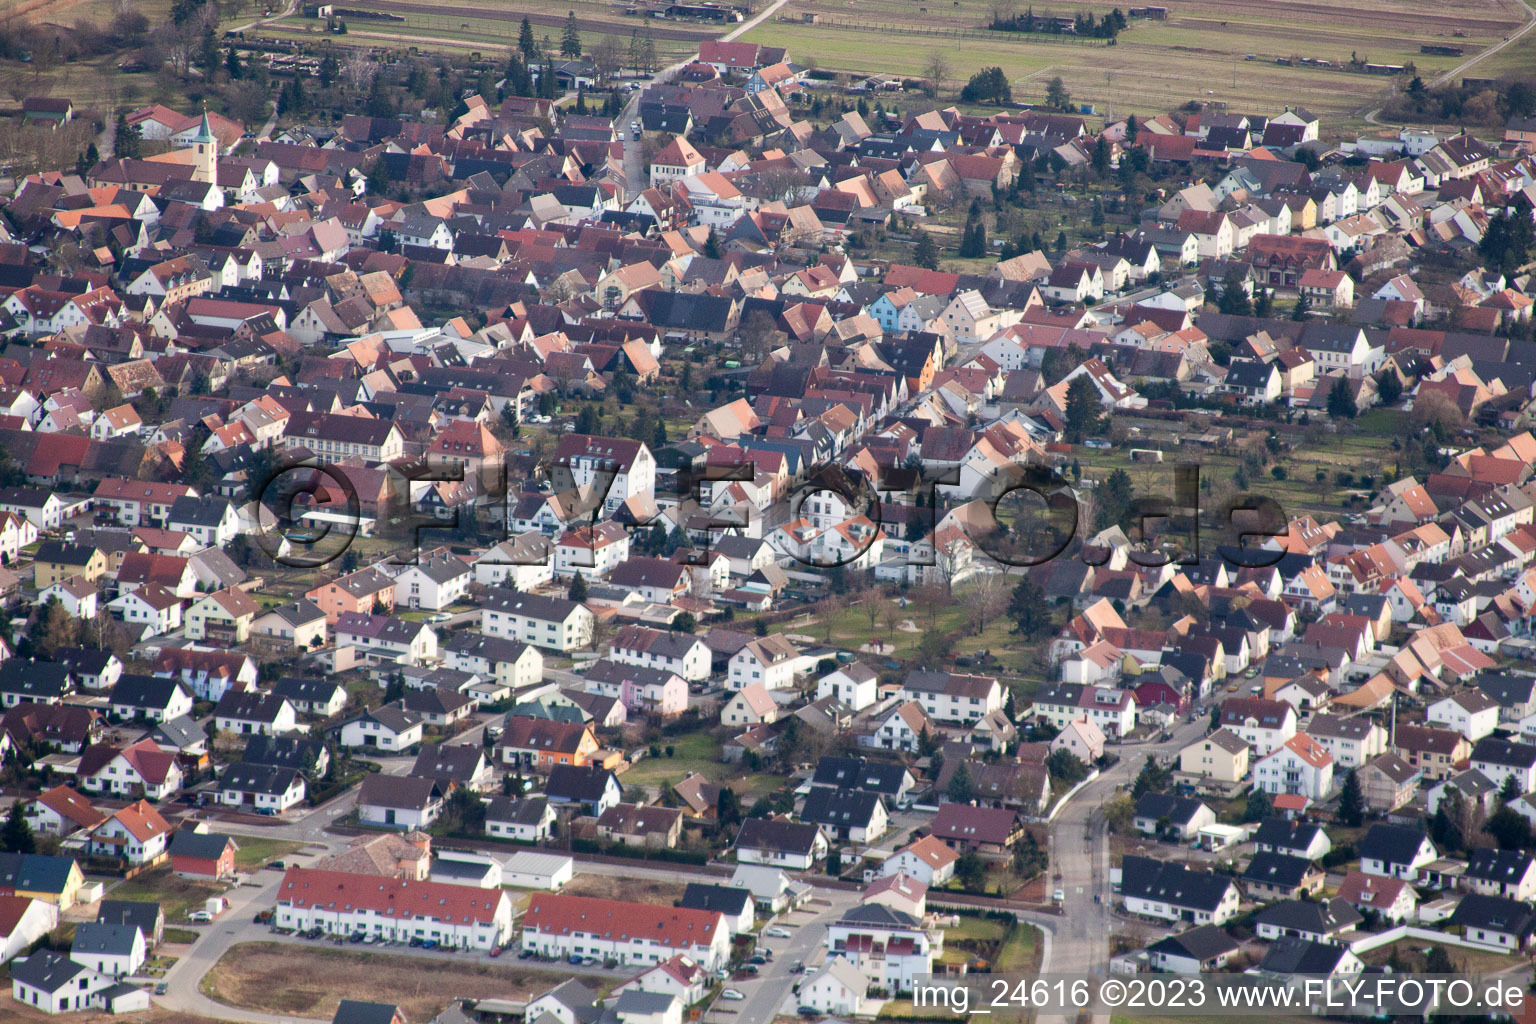 Drone image of District Neuthard in Karlsdorf-Neuthard in the state Baden-Wuerttemberg, Germany